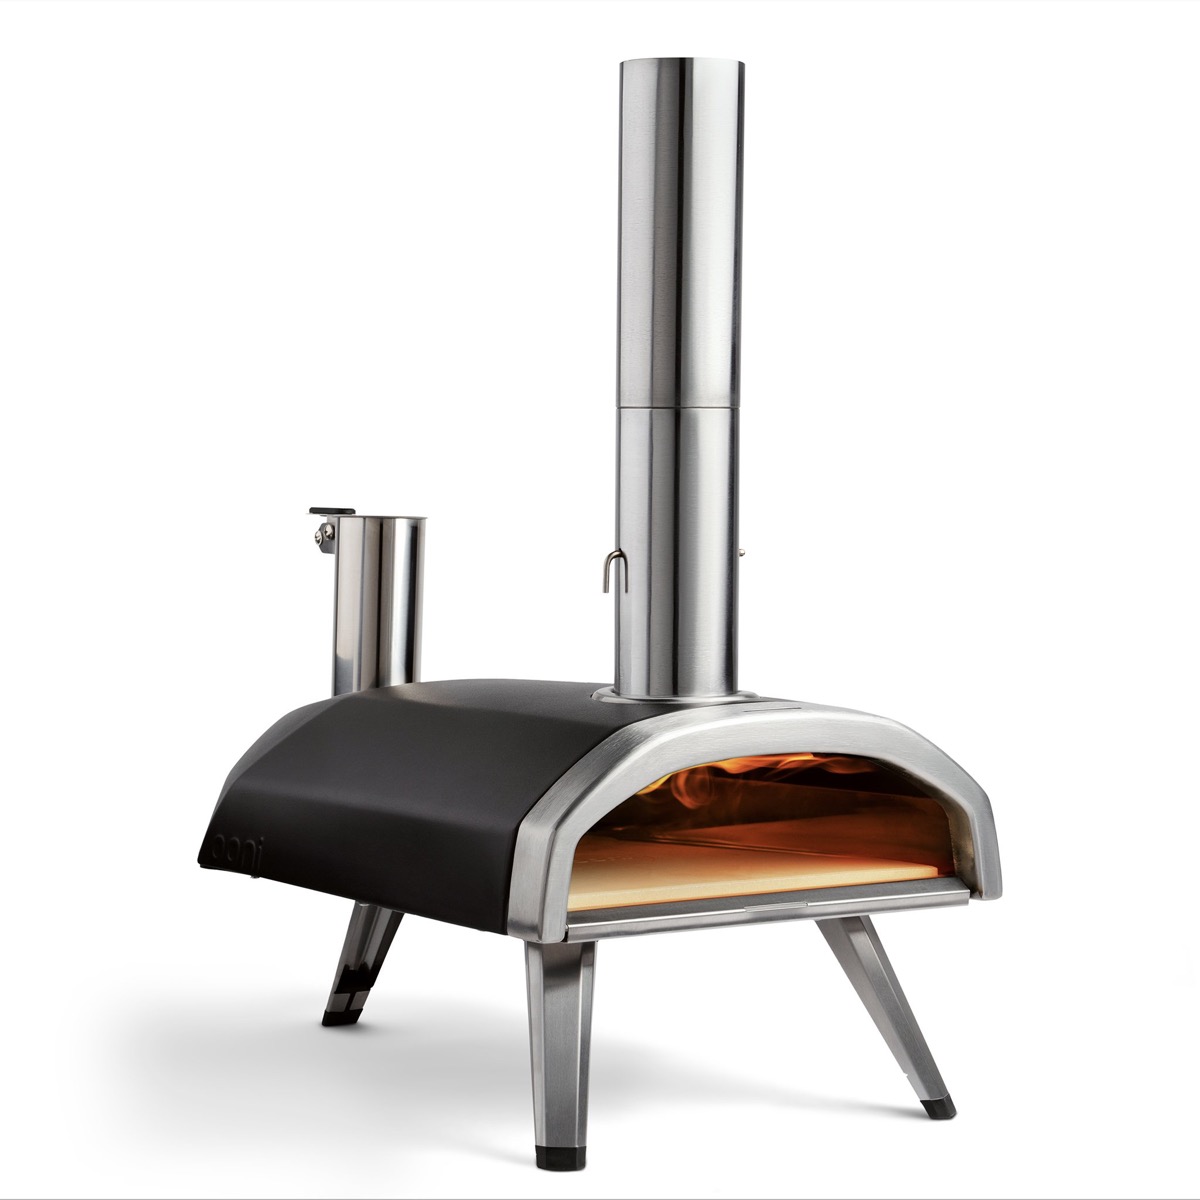 An Ooni pizza oven